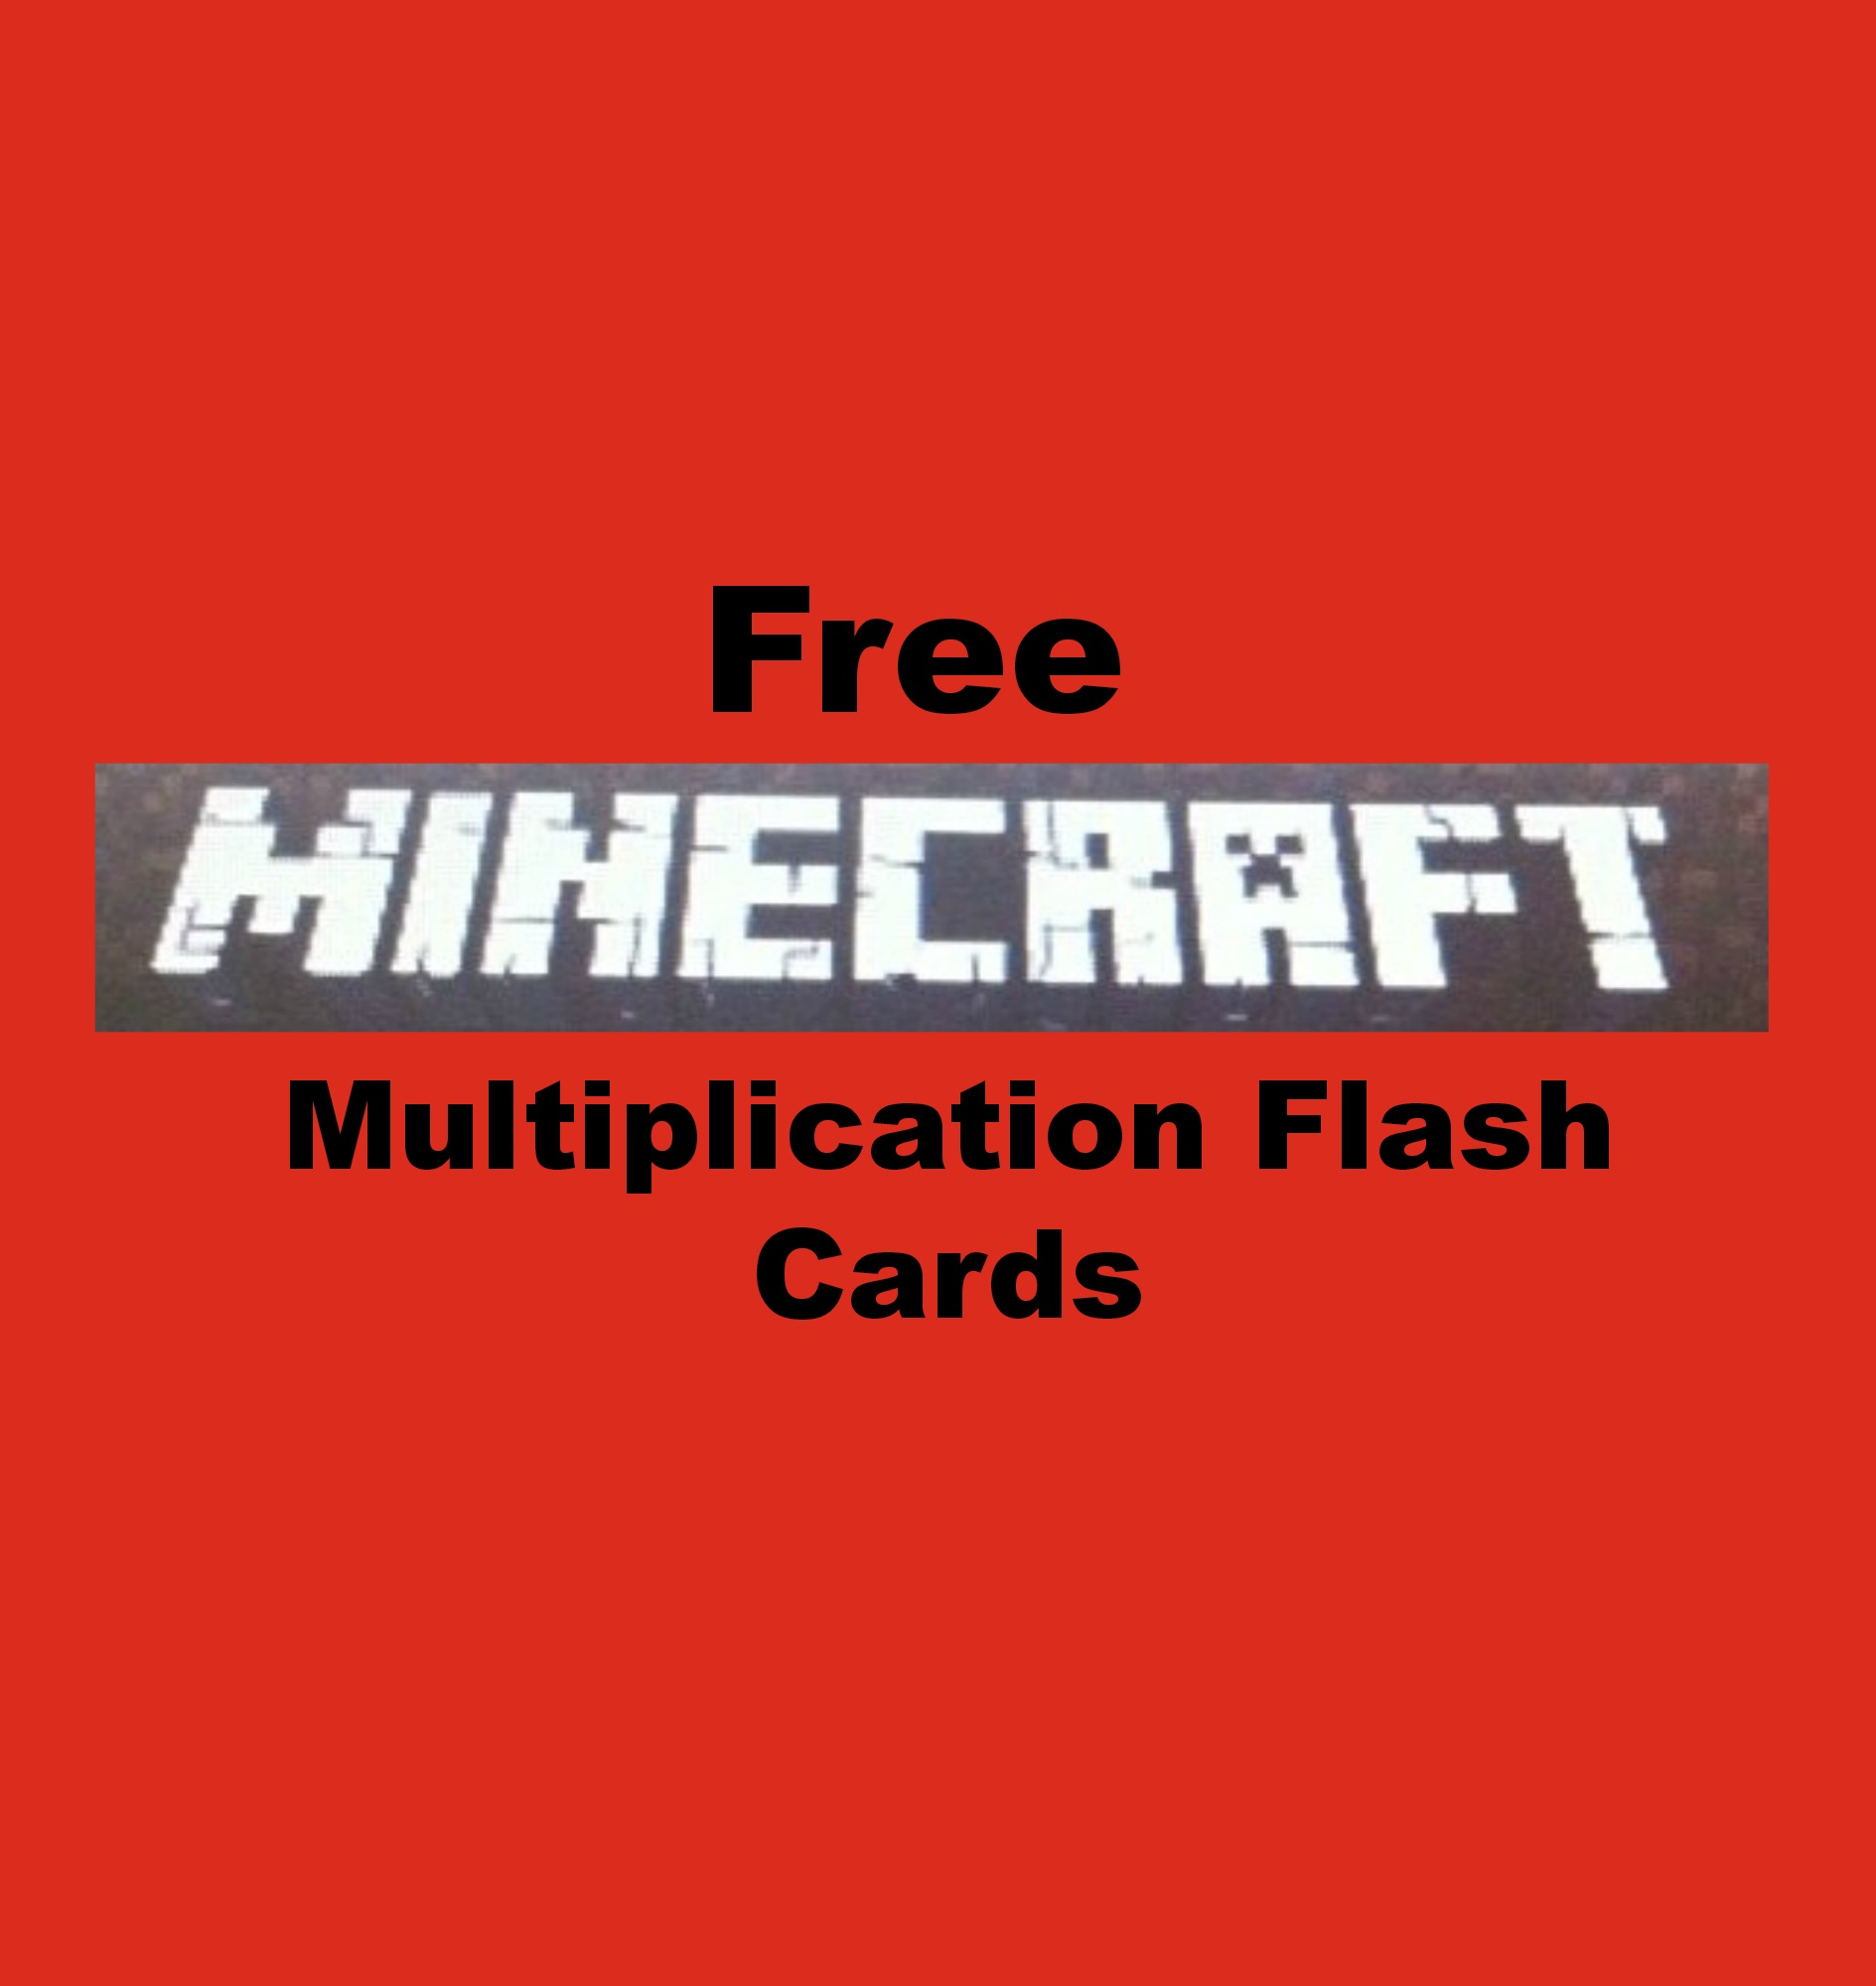 Free Minecraft Multiplication Flash Cards - Adventures In